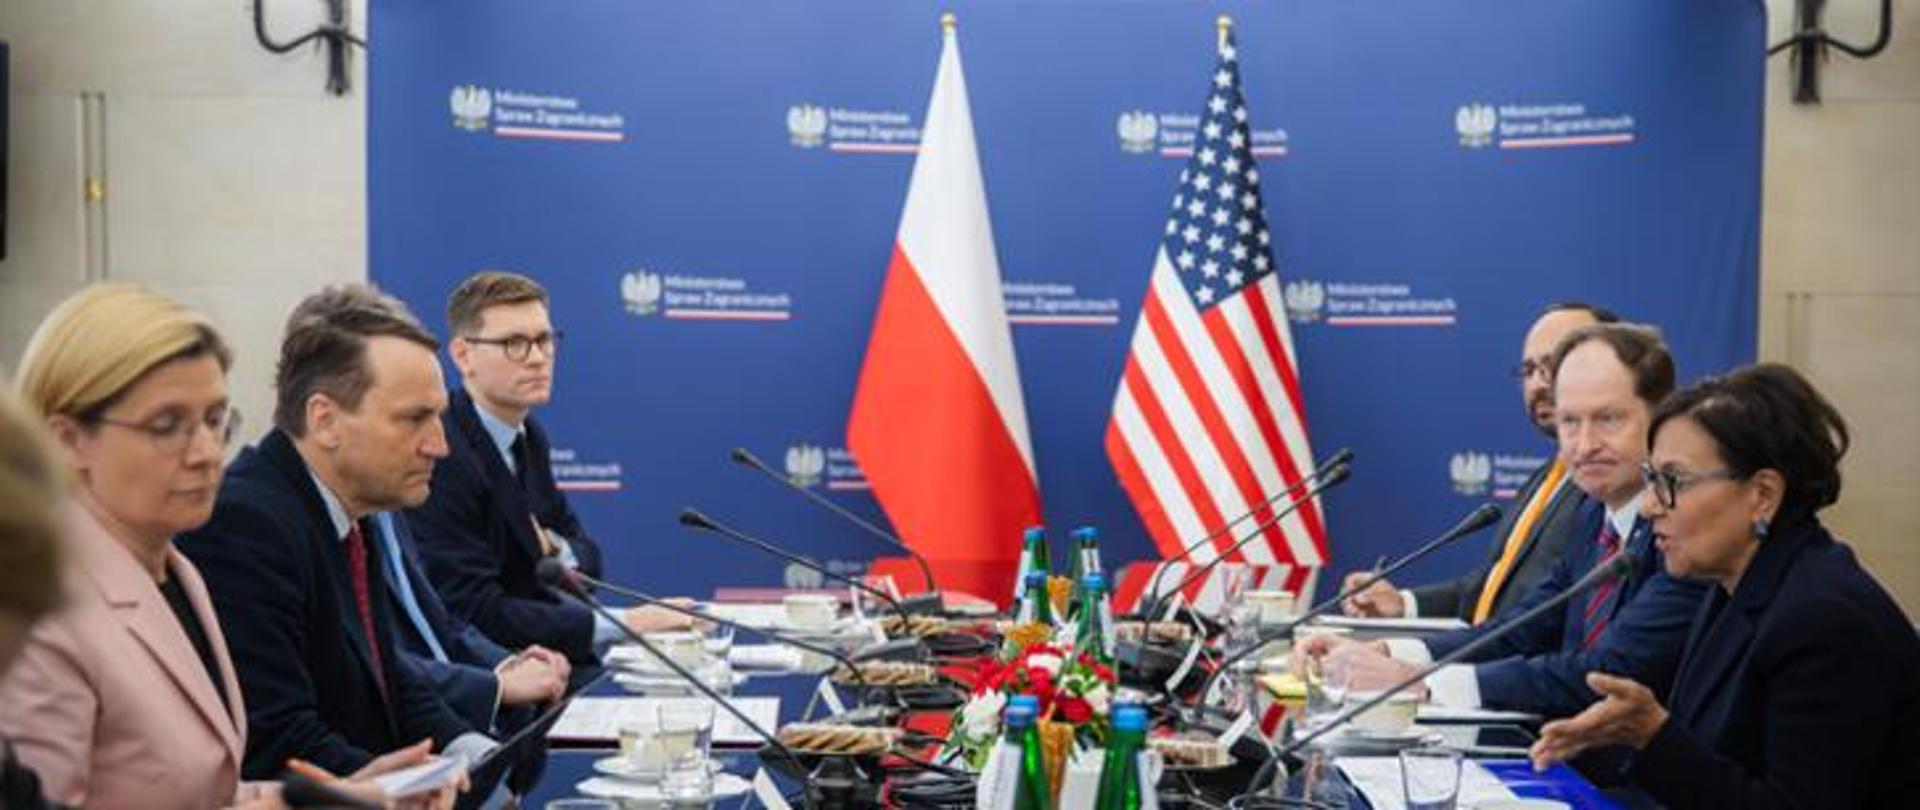 People are sitting at the table. Flags of the USA and Poland are in the background. 